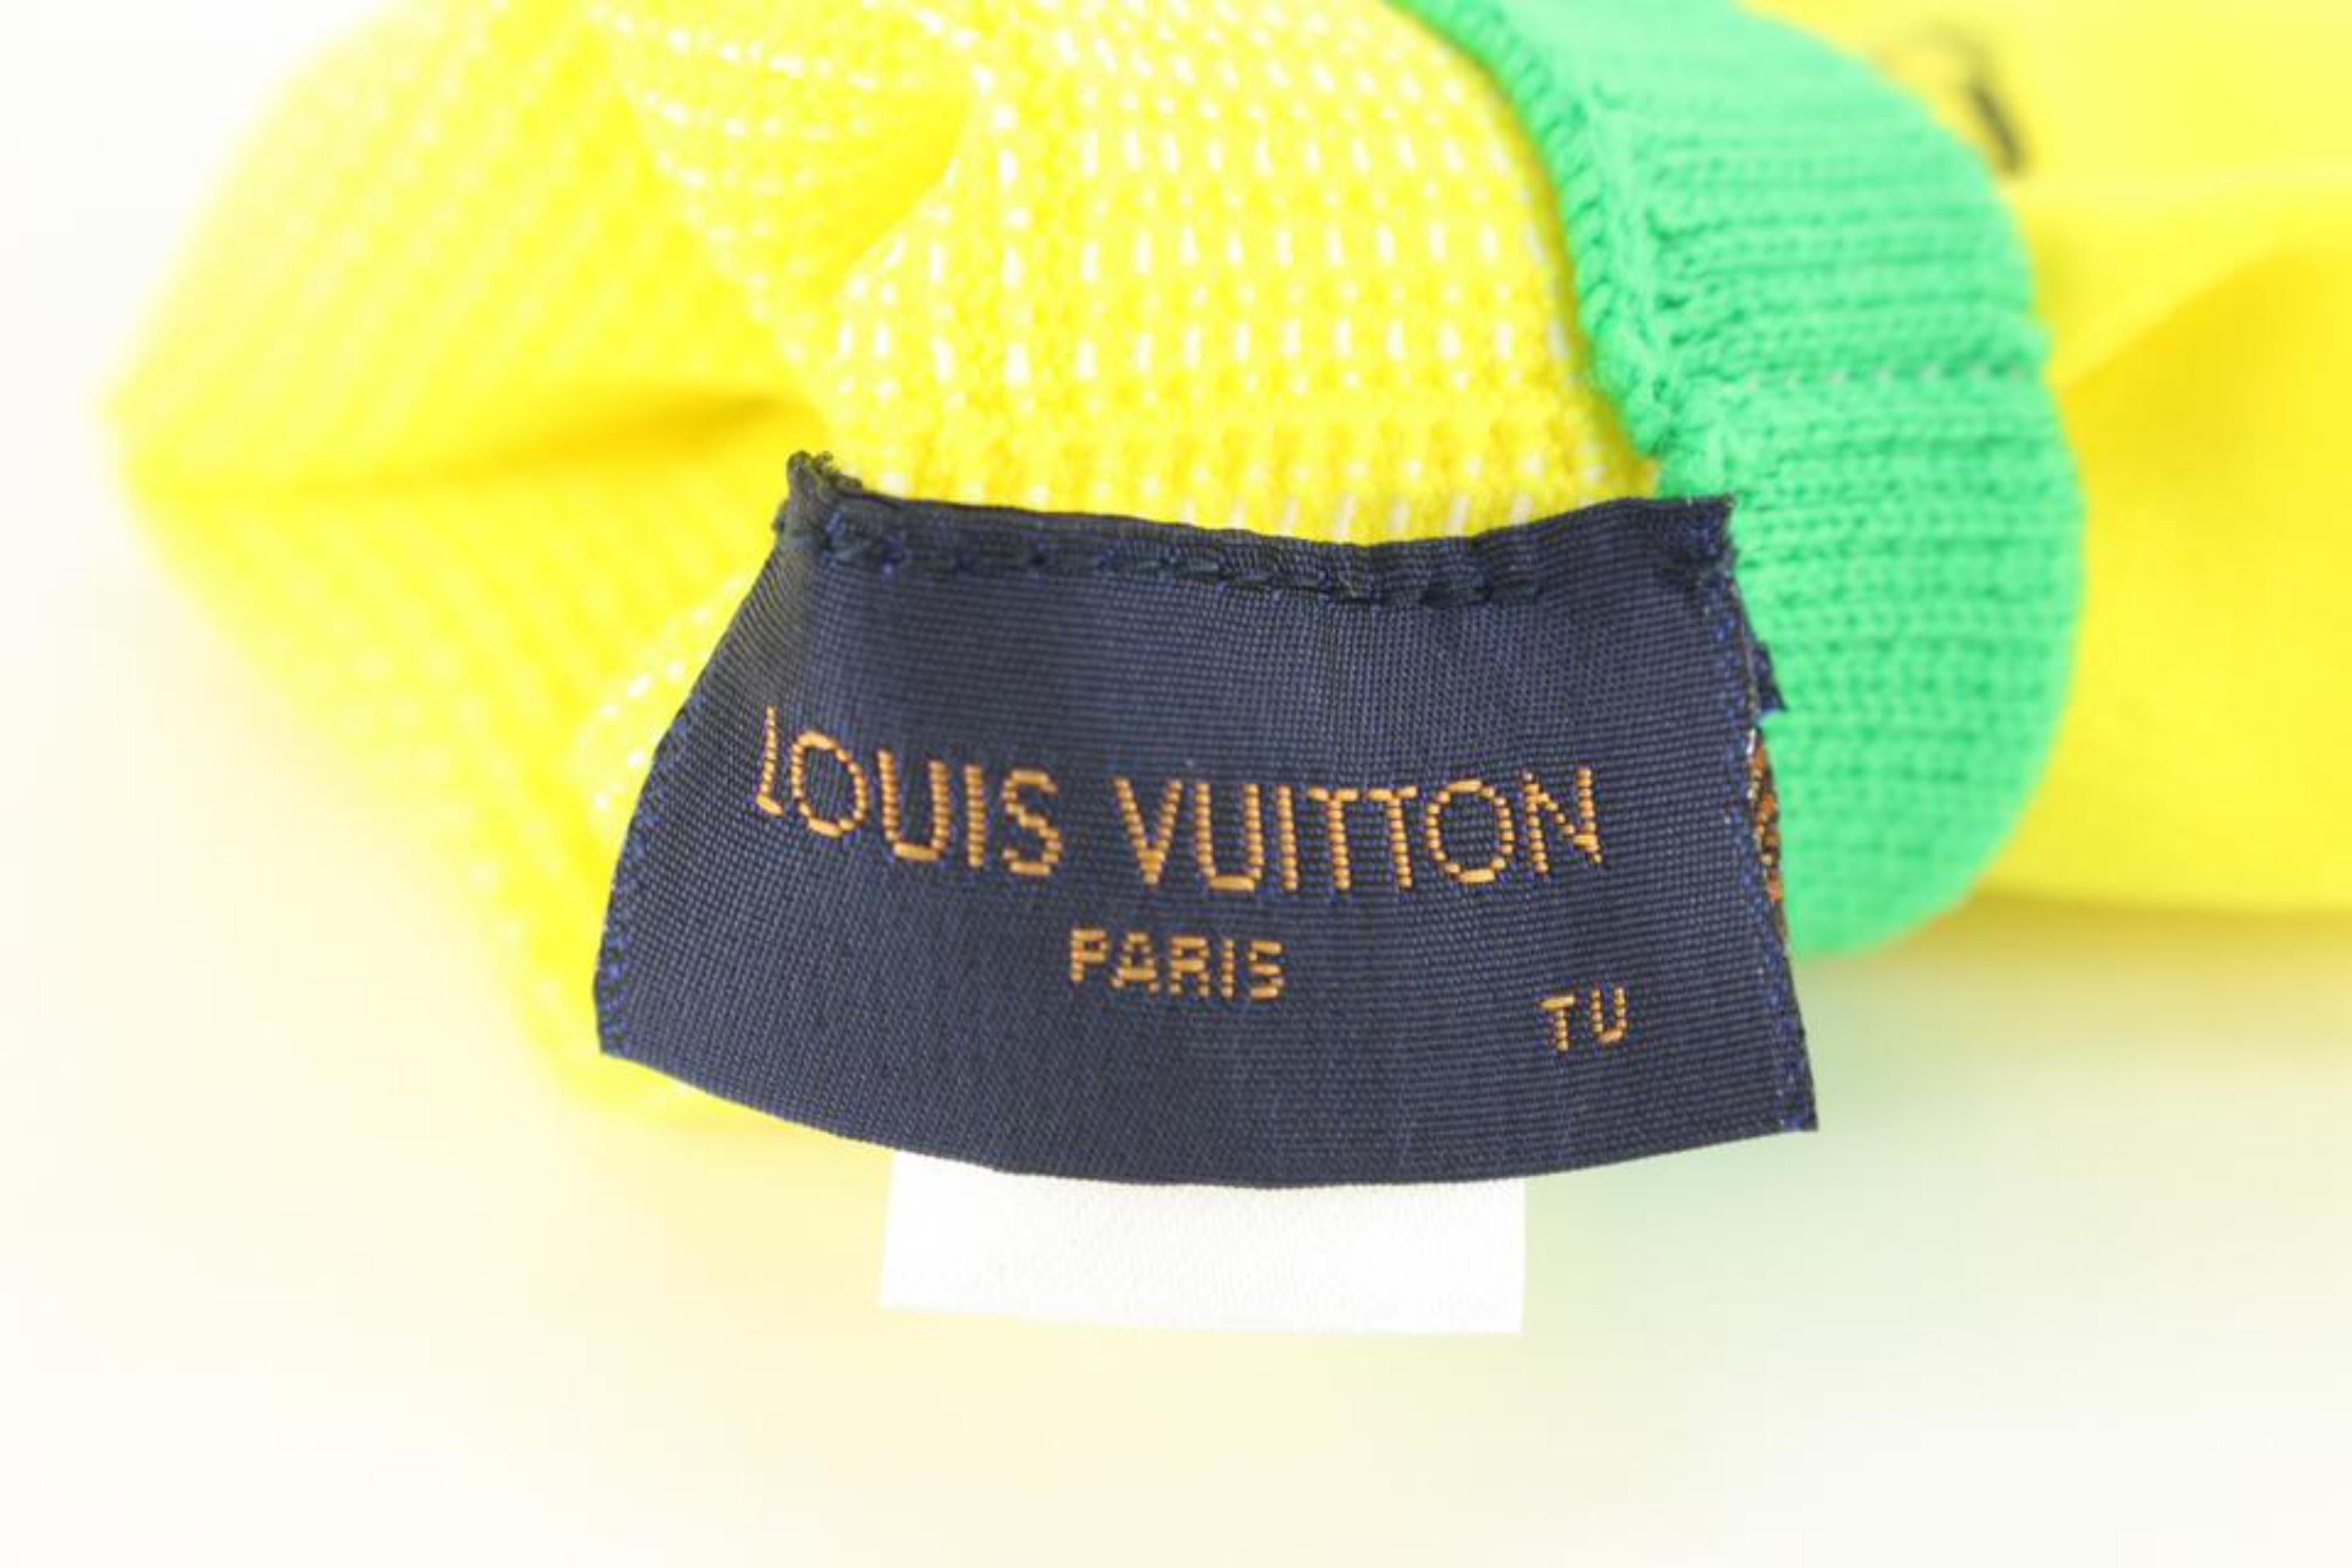 Louis Vuitton Virgil Abloh Pop Up Work Gloves Yellow  x Green 2lz830s For Sale 7